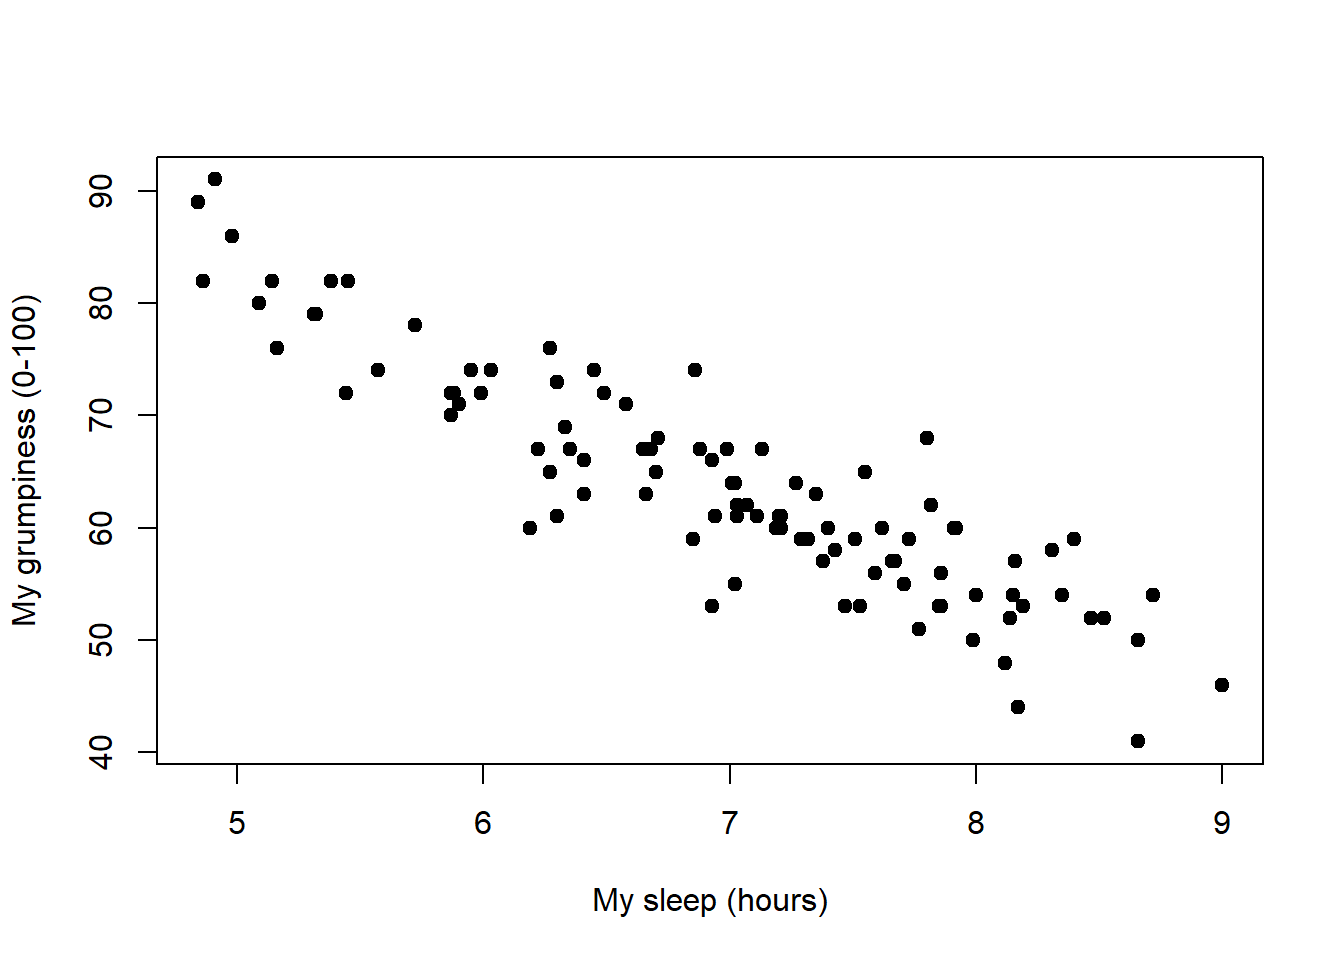 Chapter 27 Linear regression  Learning statistics with R: A